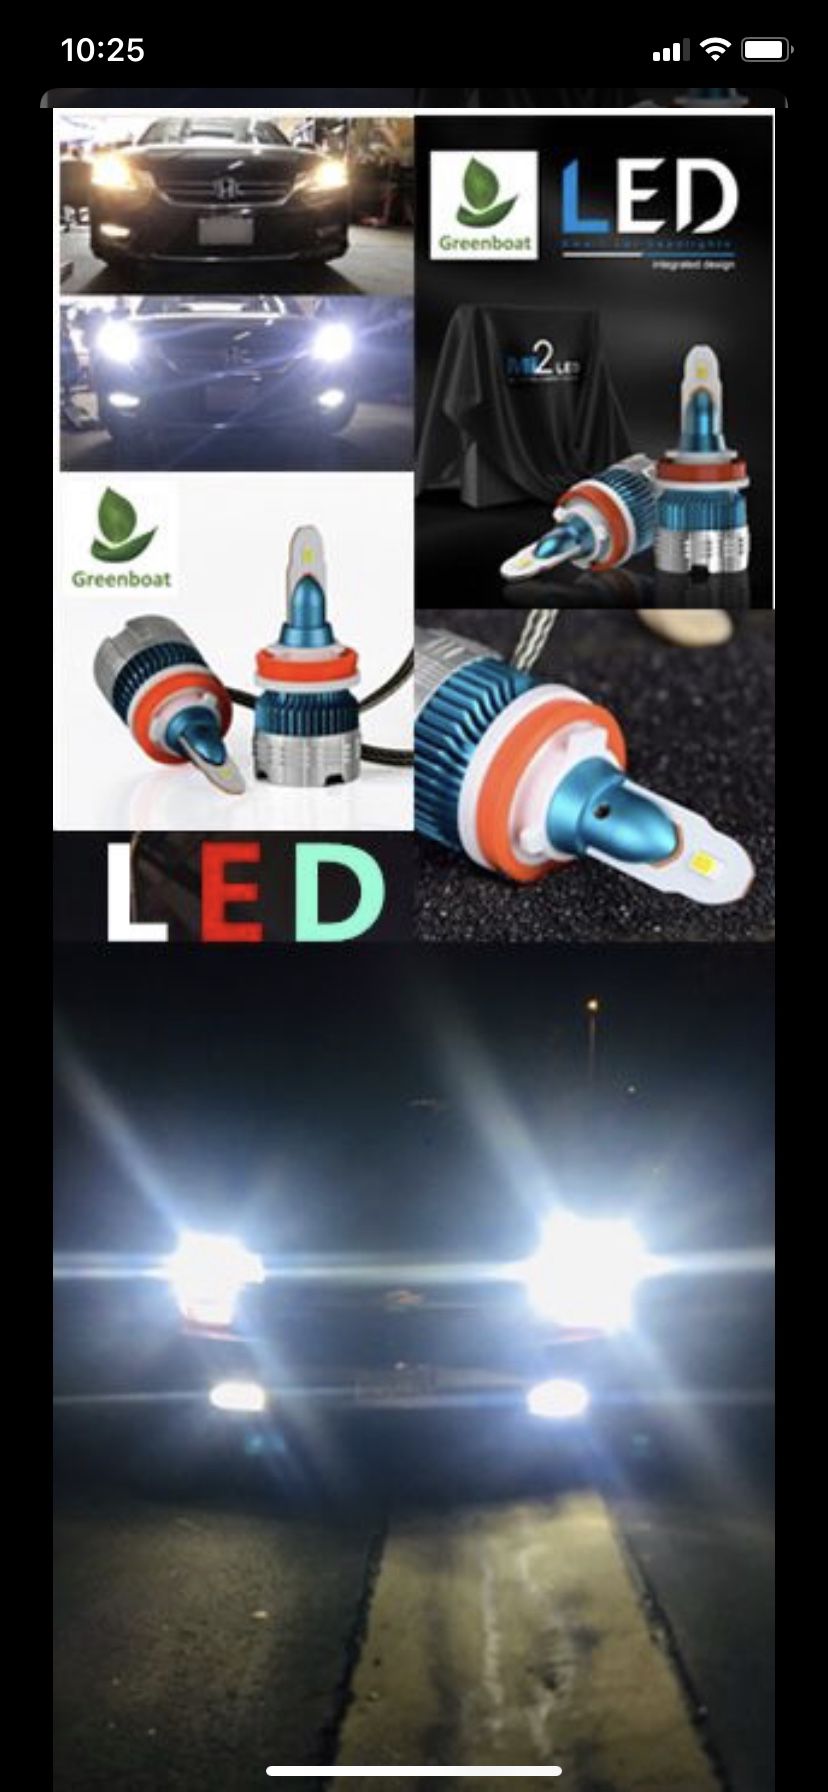 Super Bright White LED headlight Solutions H1 H4 H7 H8 H9 H10 H11 H13 H16 full sizes Available